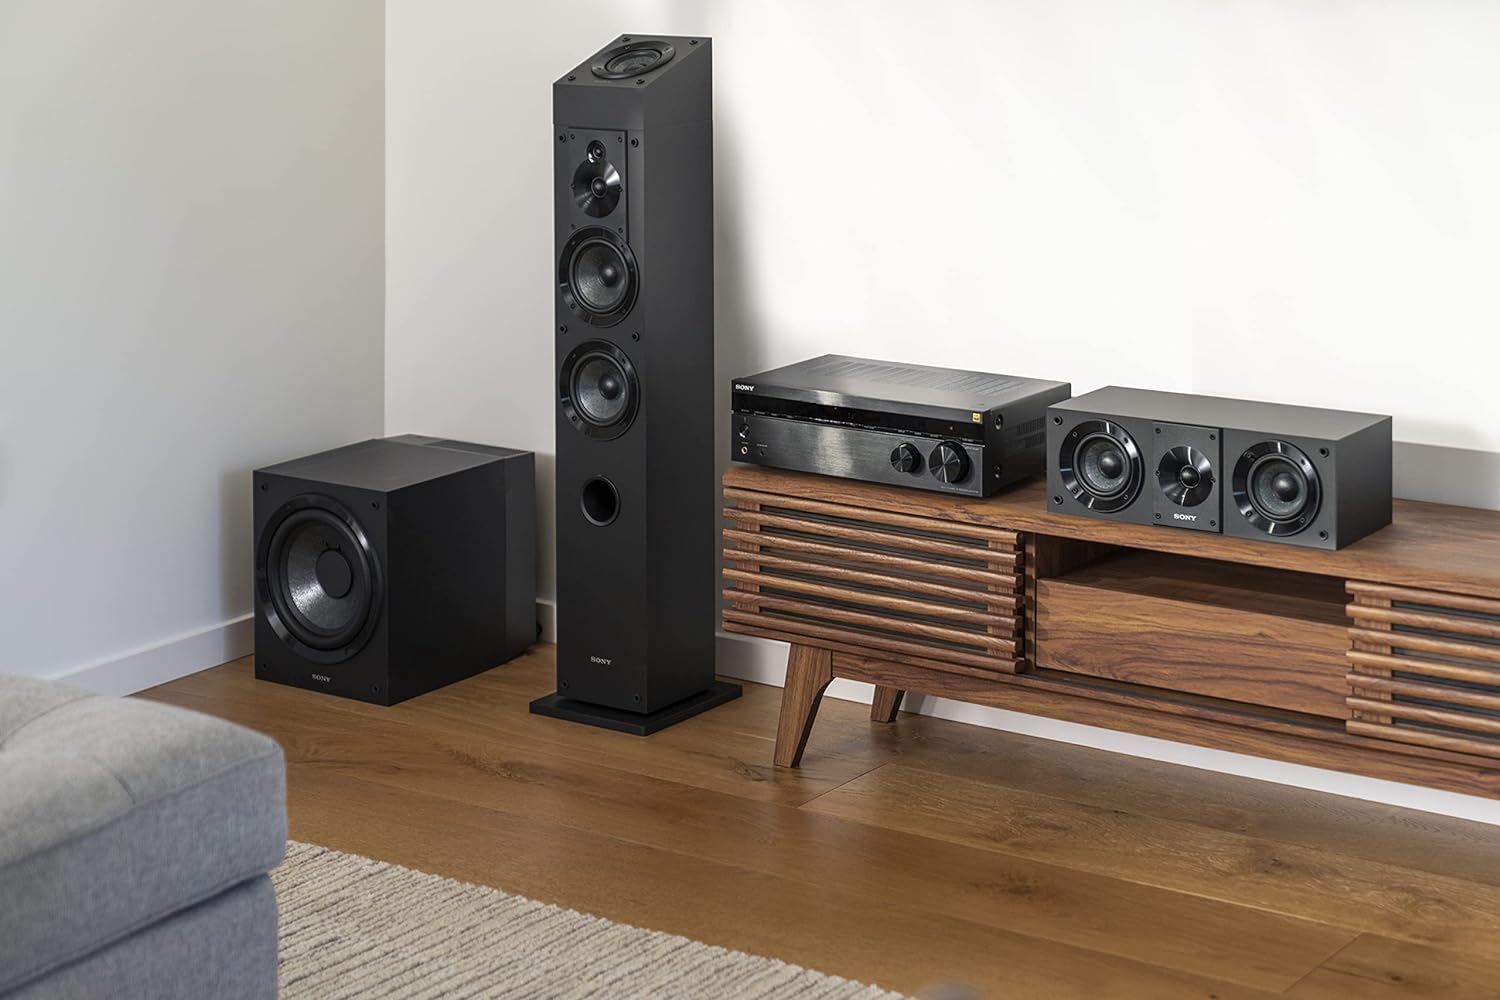 sony-5-2ch-av-receiver-what-you-need-to-hook-up-speakers